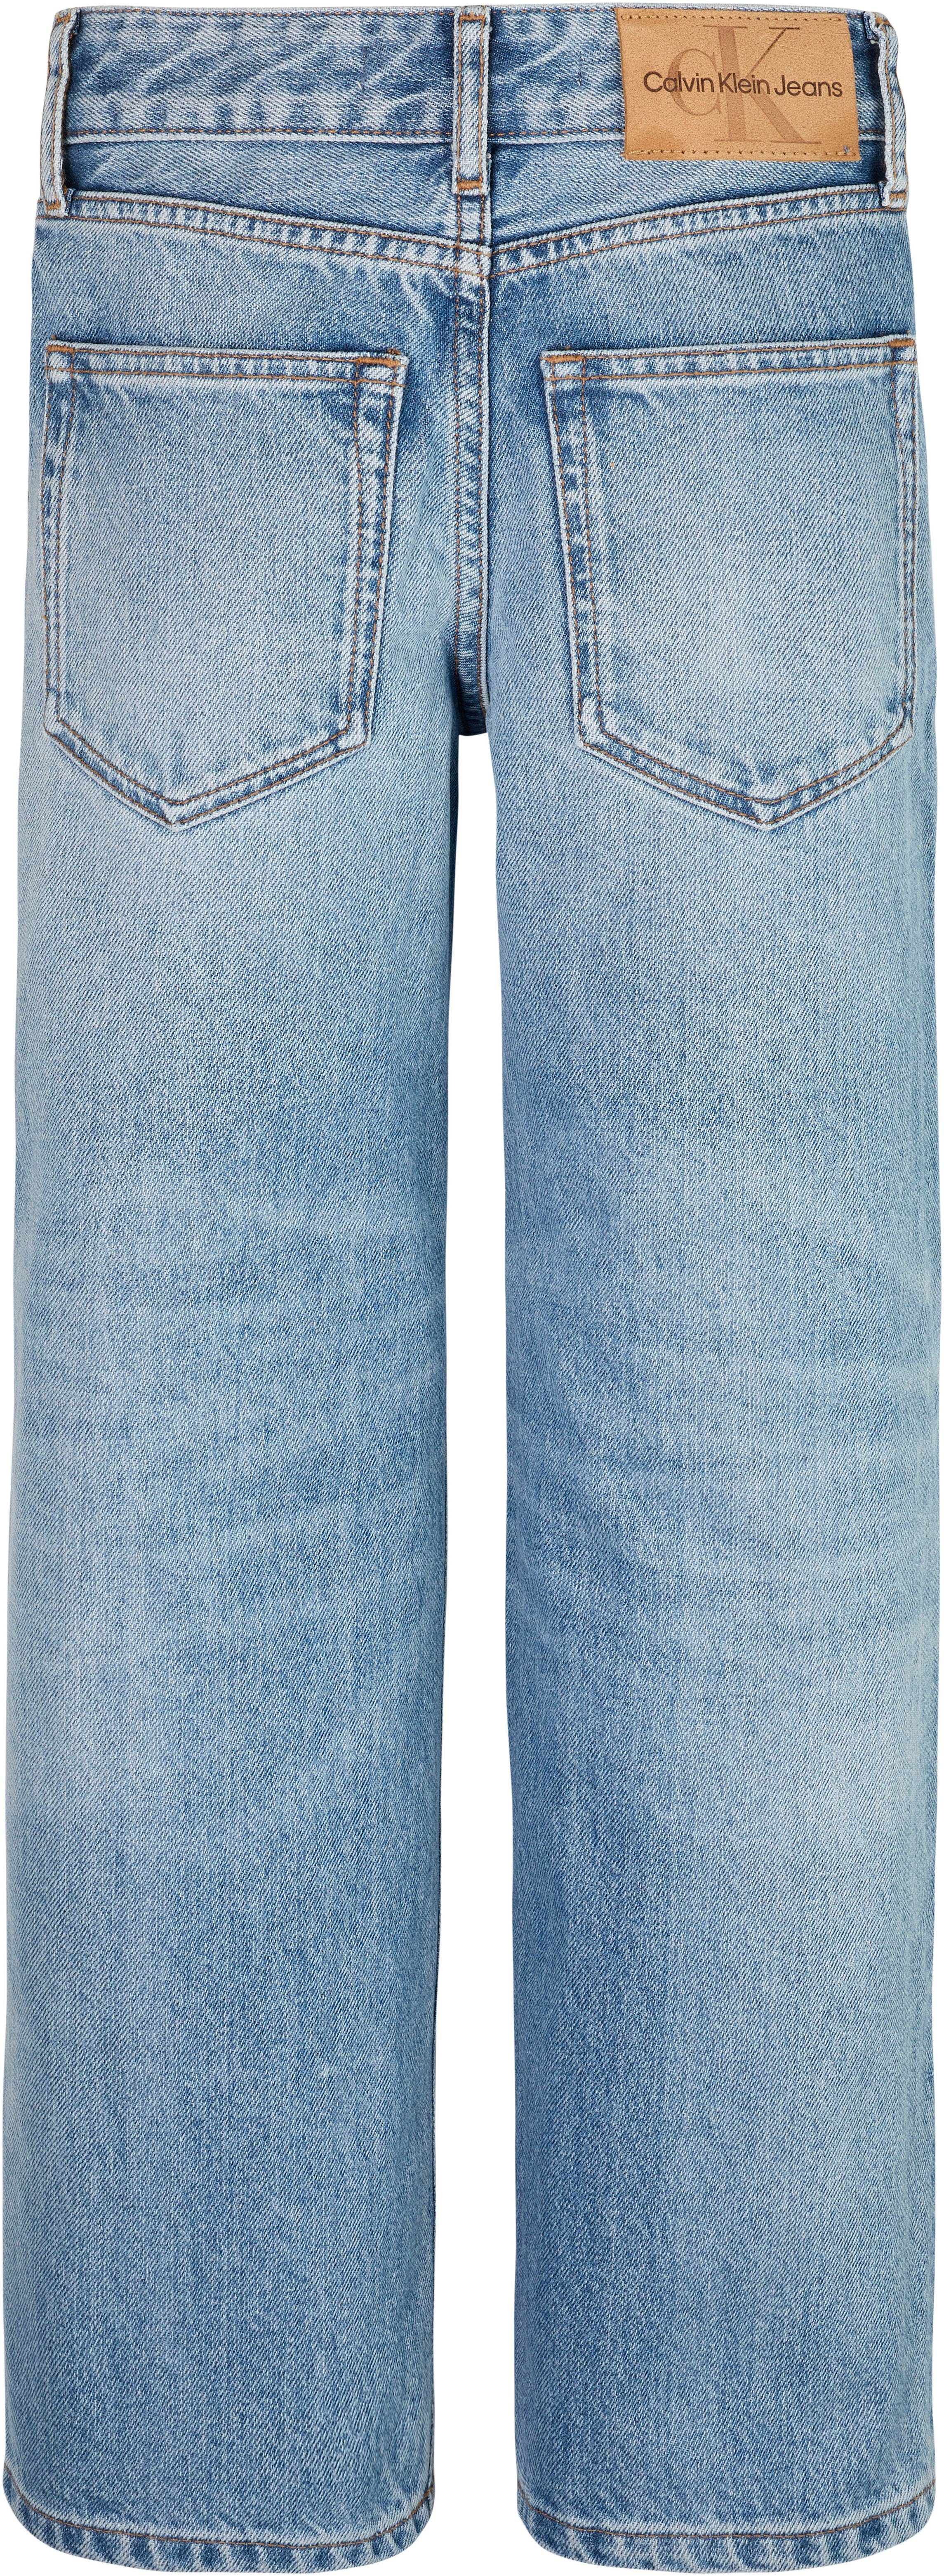 Calvin Klein Stretch-Jeans Jeans RELAXED AUTH. BLUE SKATER LIGHT